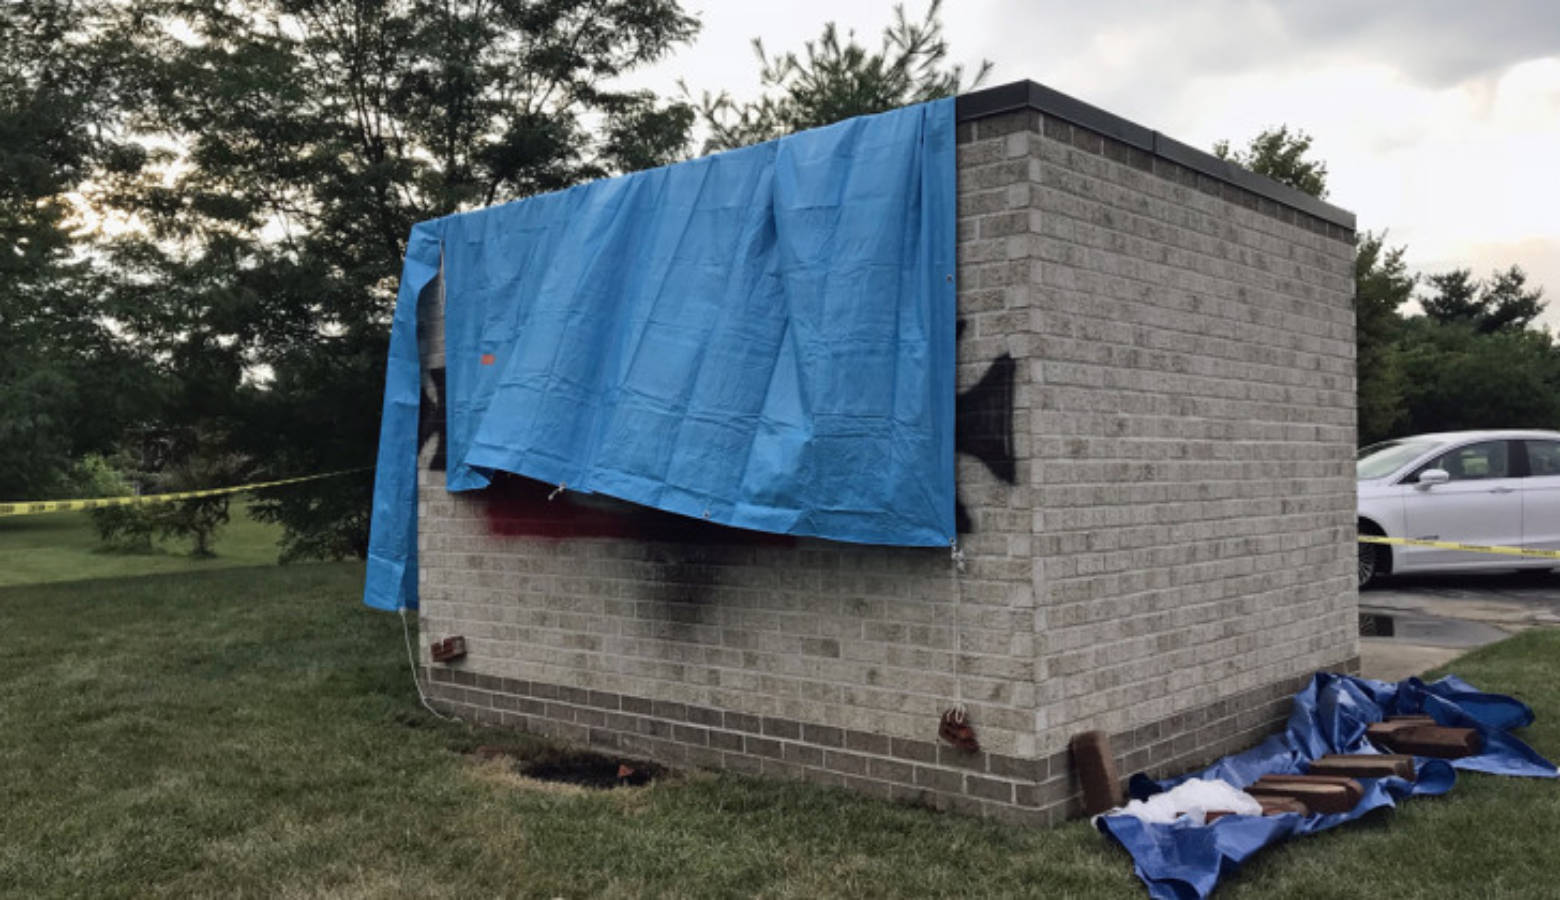 Anti-Semitic graffiti was spray-painted at Congregation Shaarey Tefilla in Carmel, on the bricks making up a shed for the synagogue's garbage container.